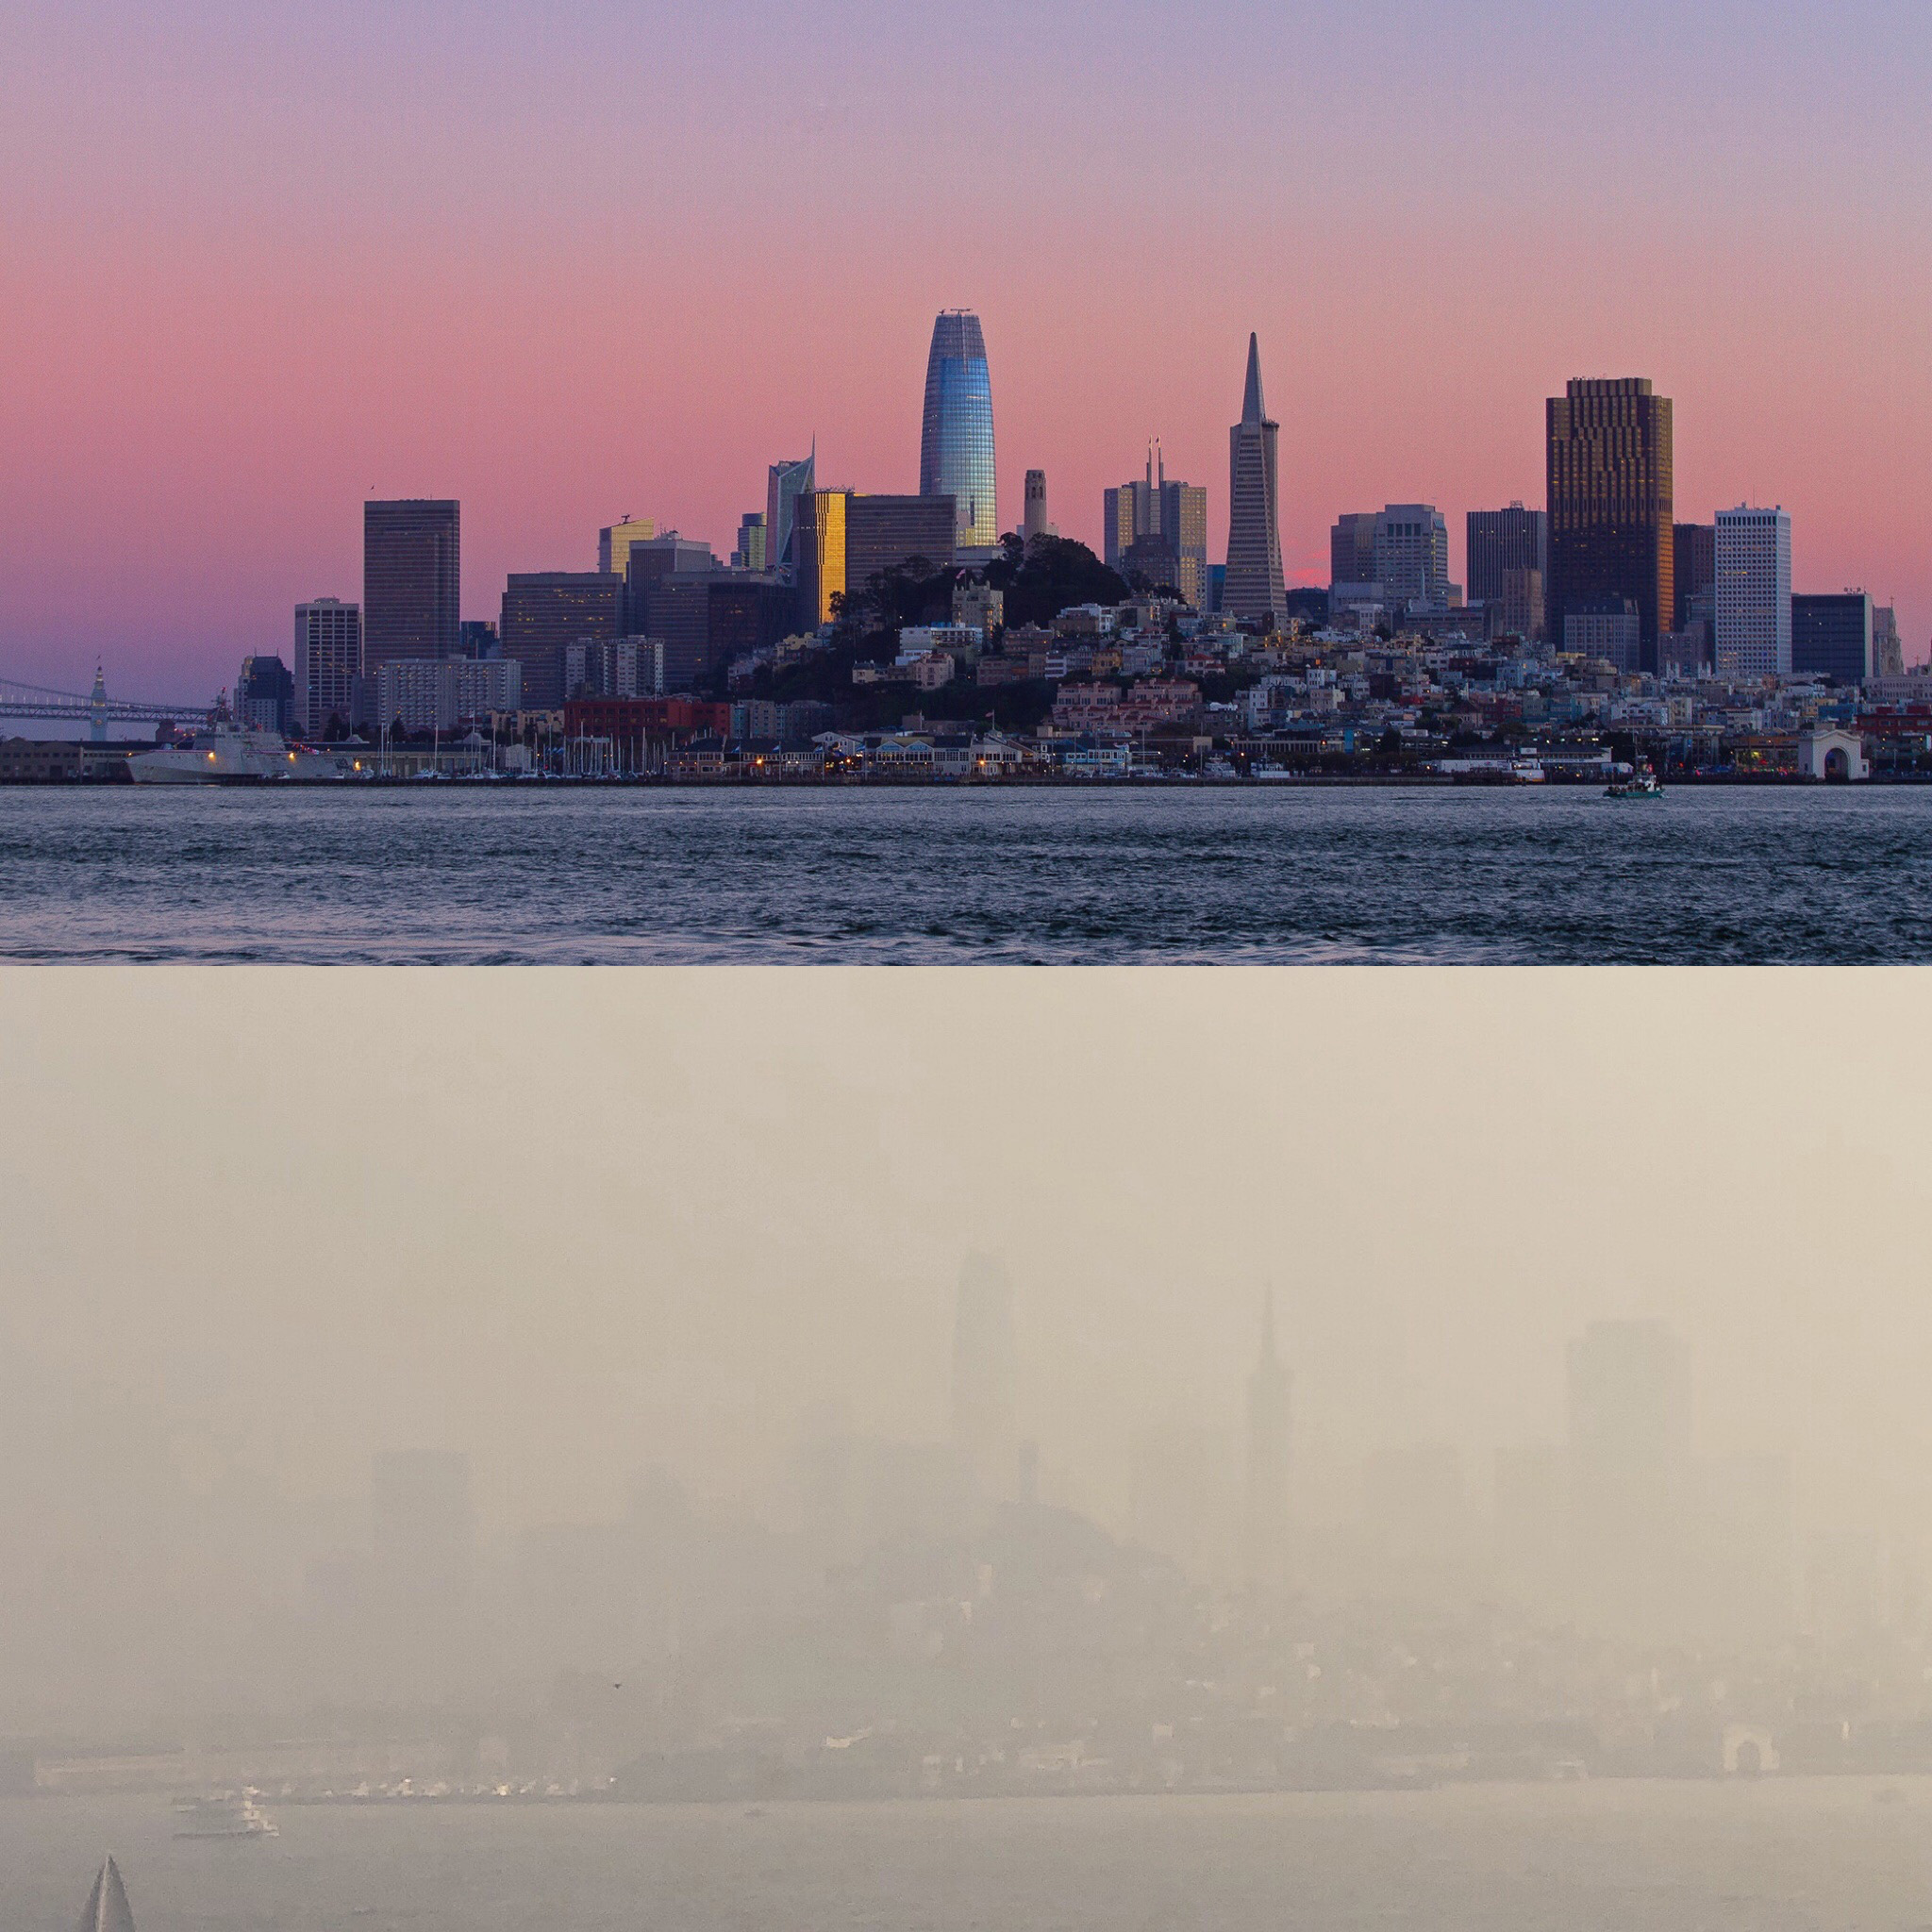 Marc Stokes, who works on Alcatraz in San Francisco, posted side-by-side photos of the view from the island on from the week of Oct. 28 and Nov. 10, two days after a fire started in Butte County, Calif. (Marc Stokes @marcstokes79)